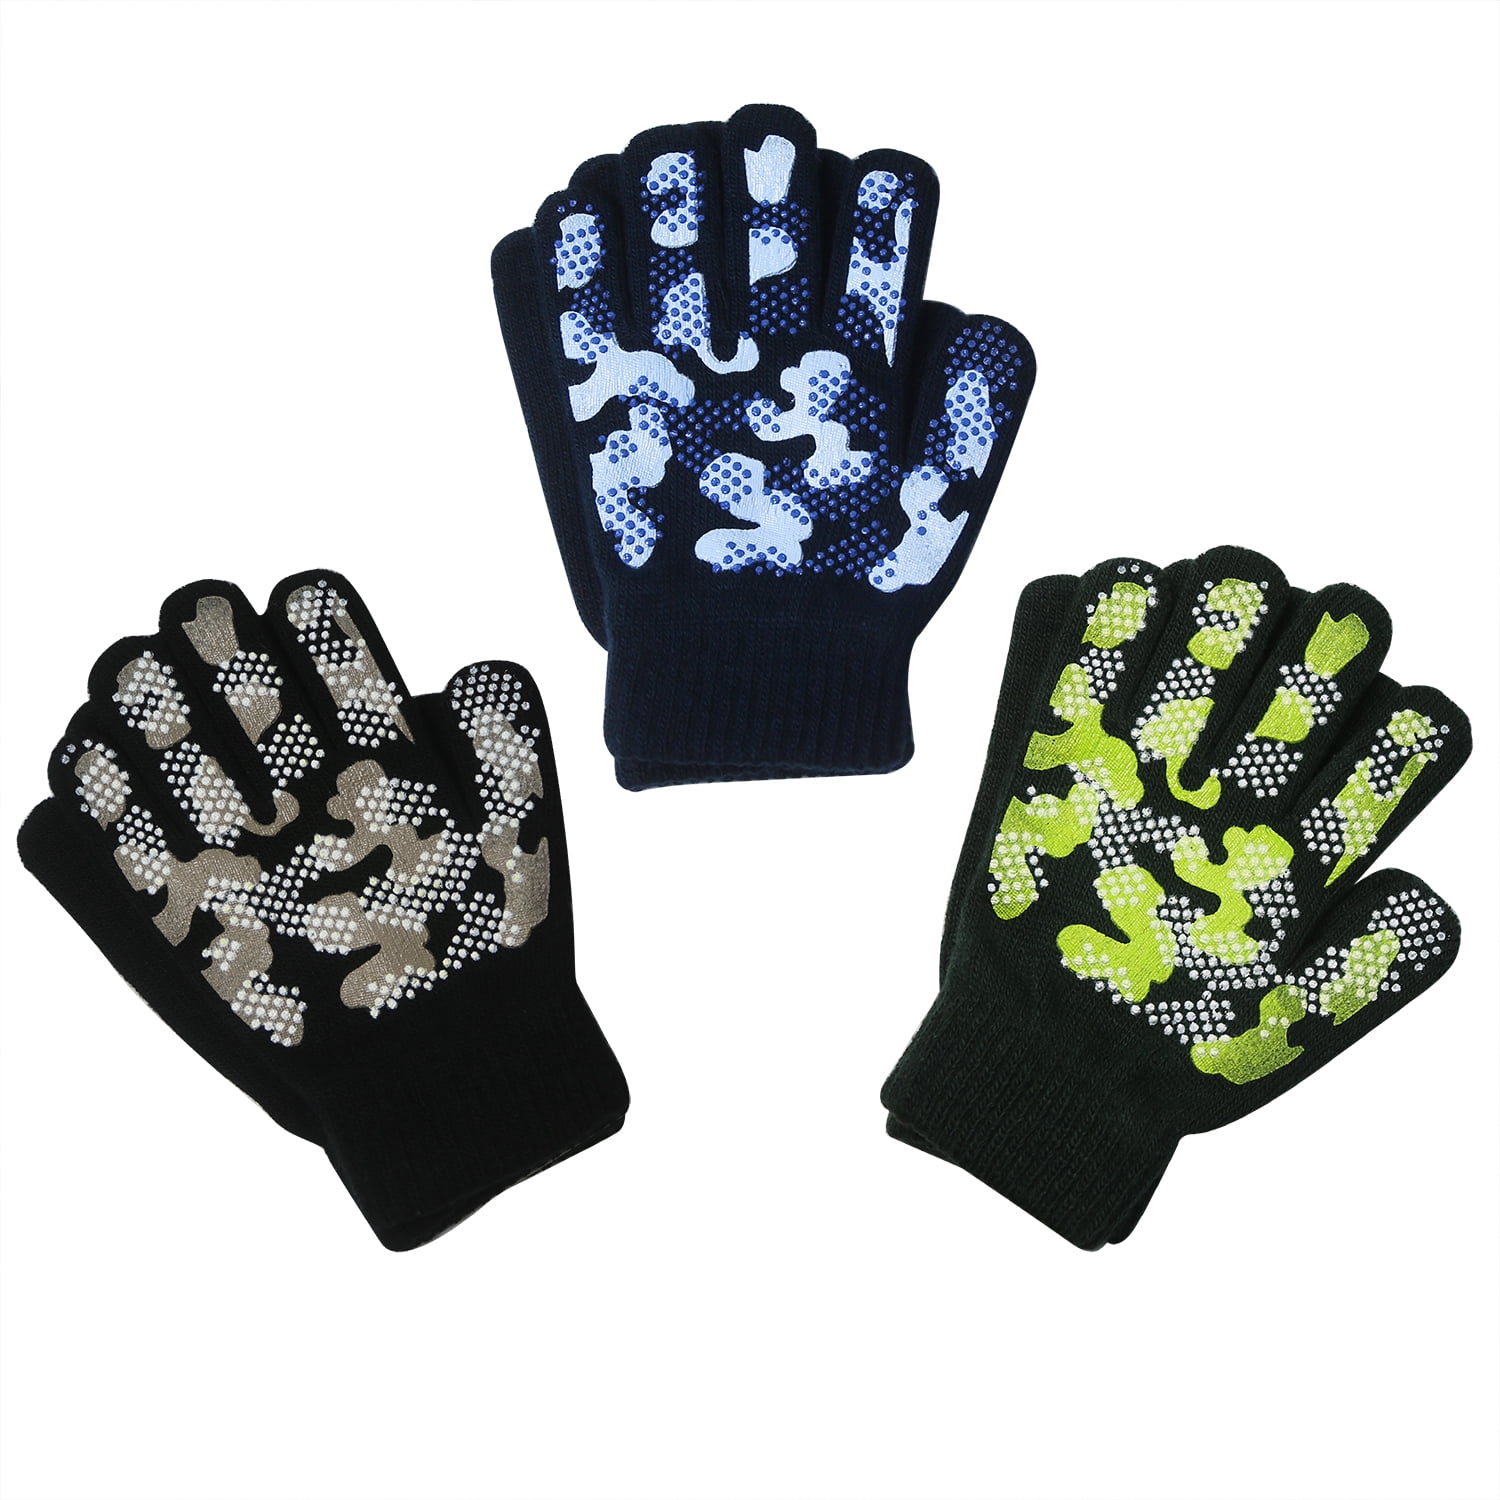 Magic GLOVES With Grip Adult Unisex Black THERMAL MAGIC WINTER GLOVES Fit All 